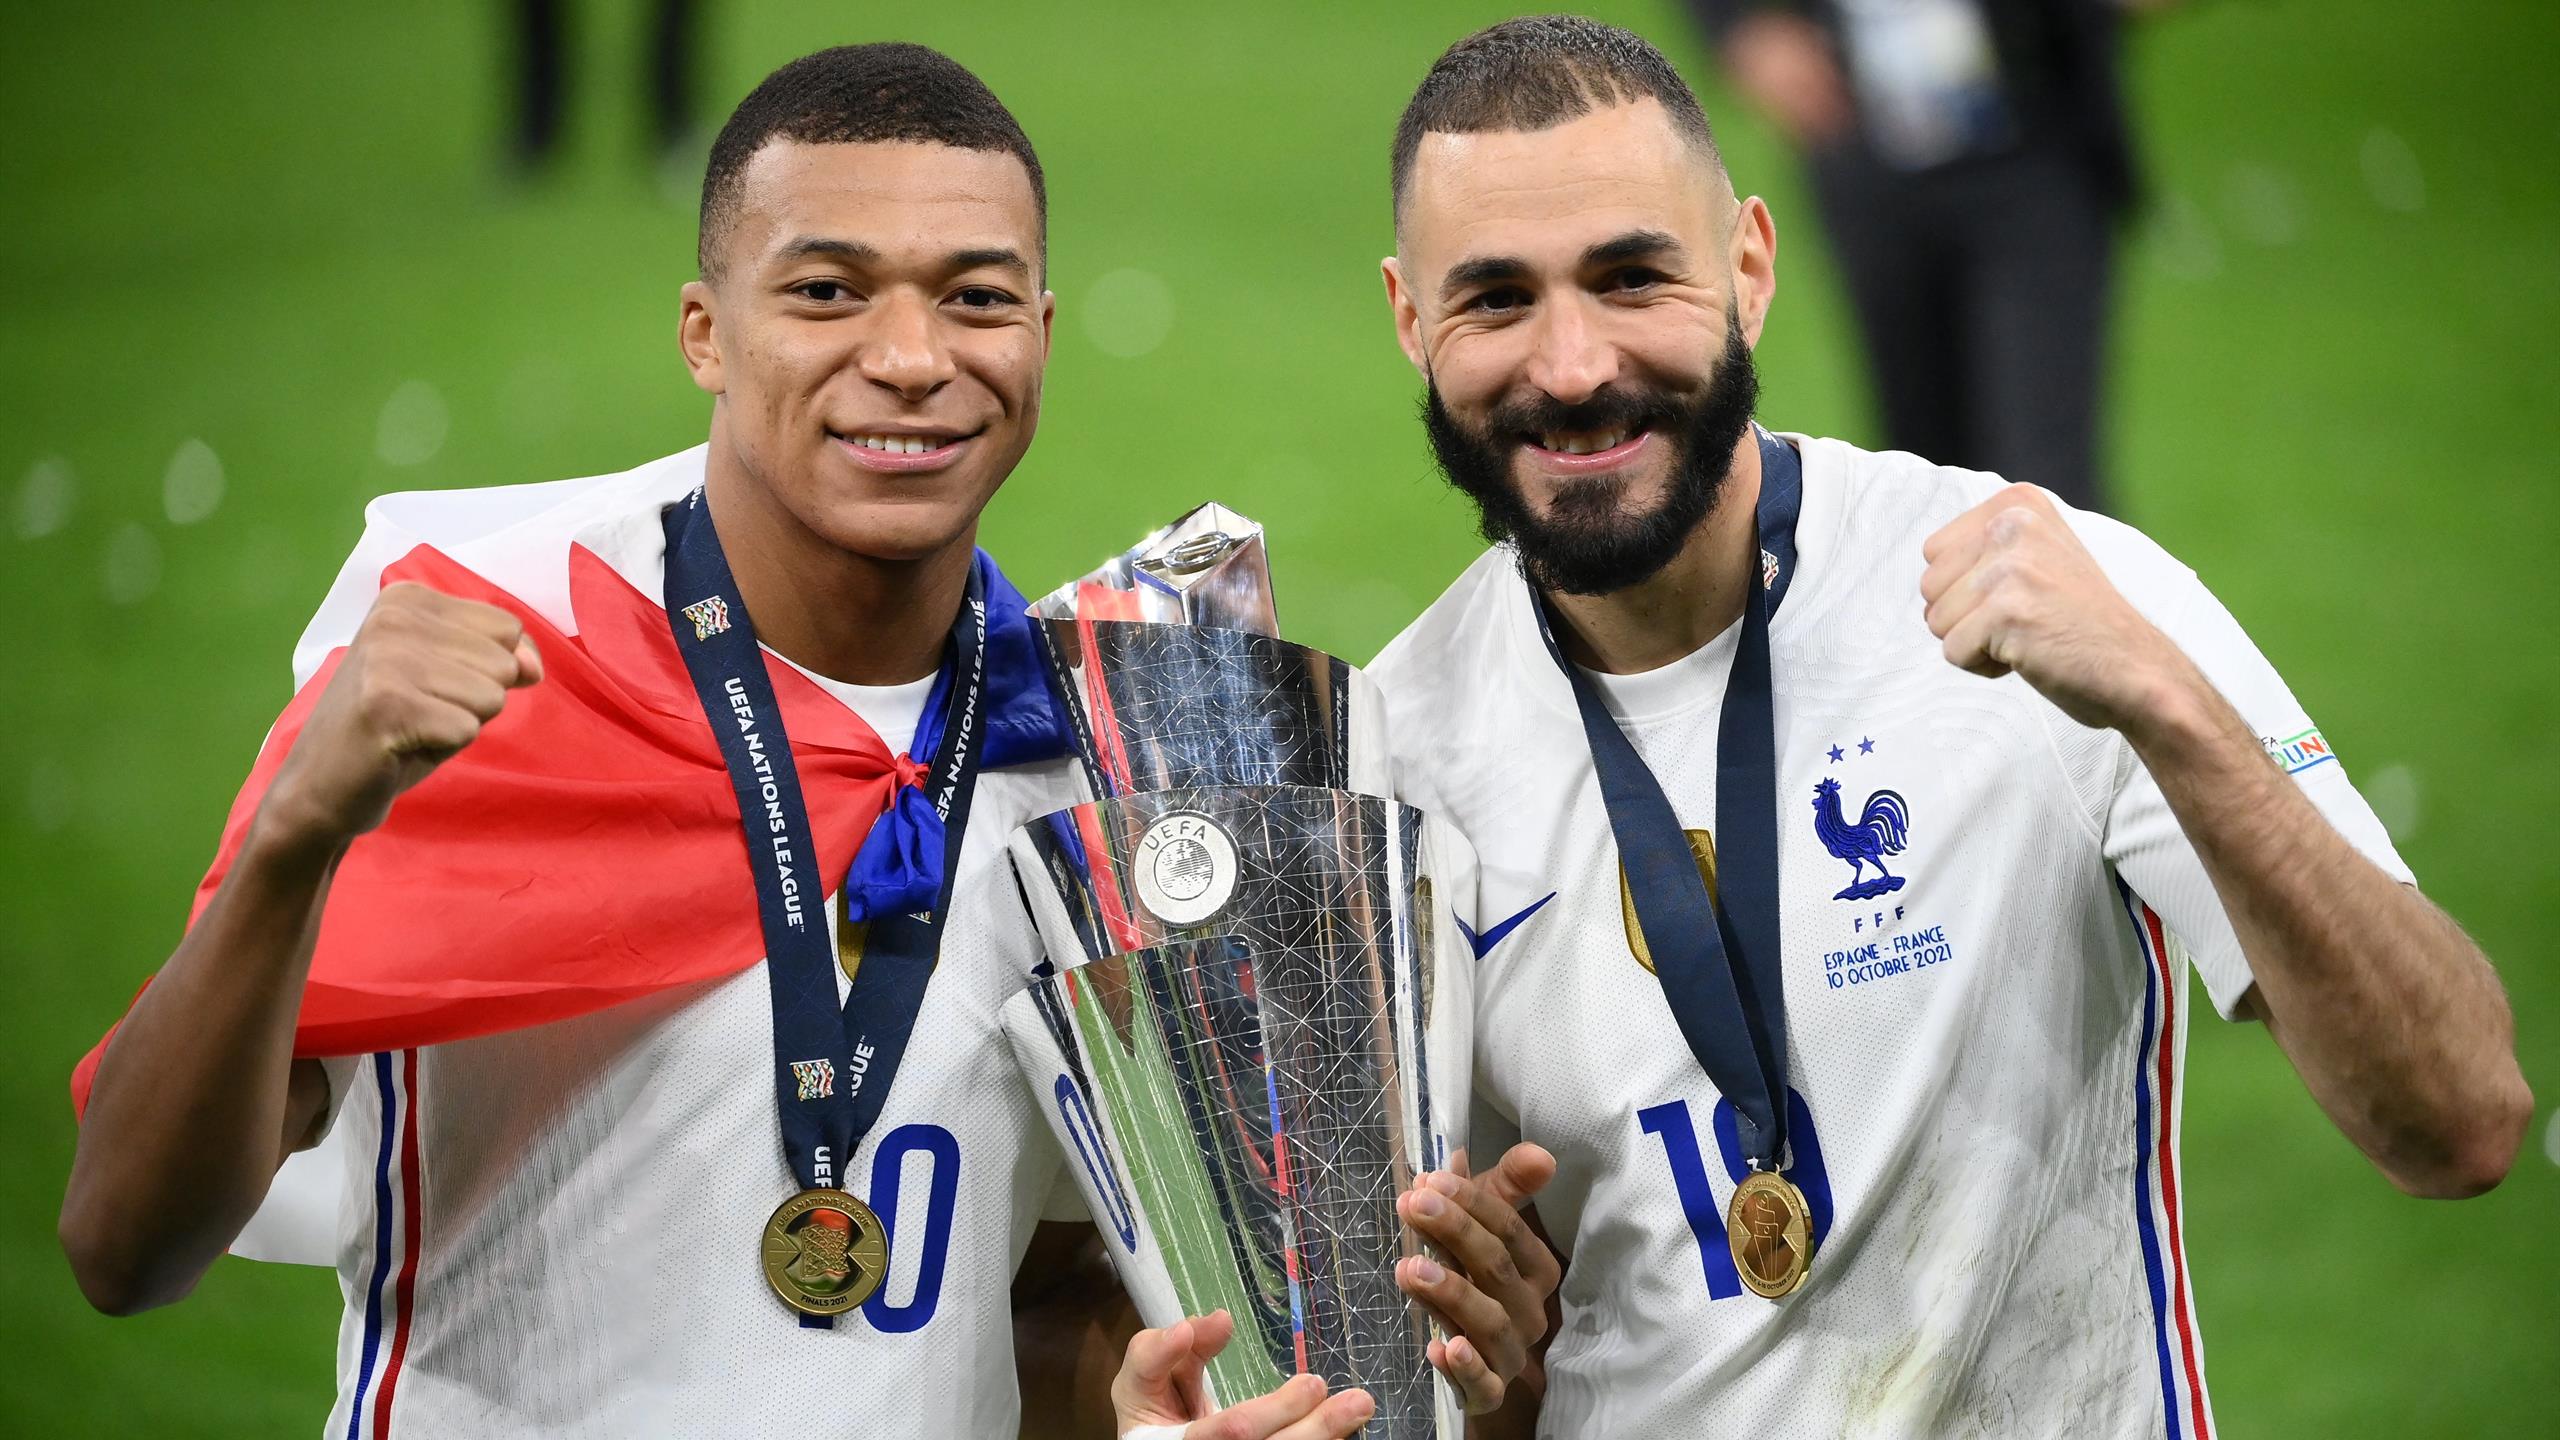 Kylian Mbappe during the 2021 UEFA Nations League award